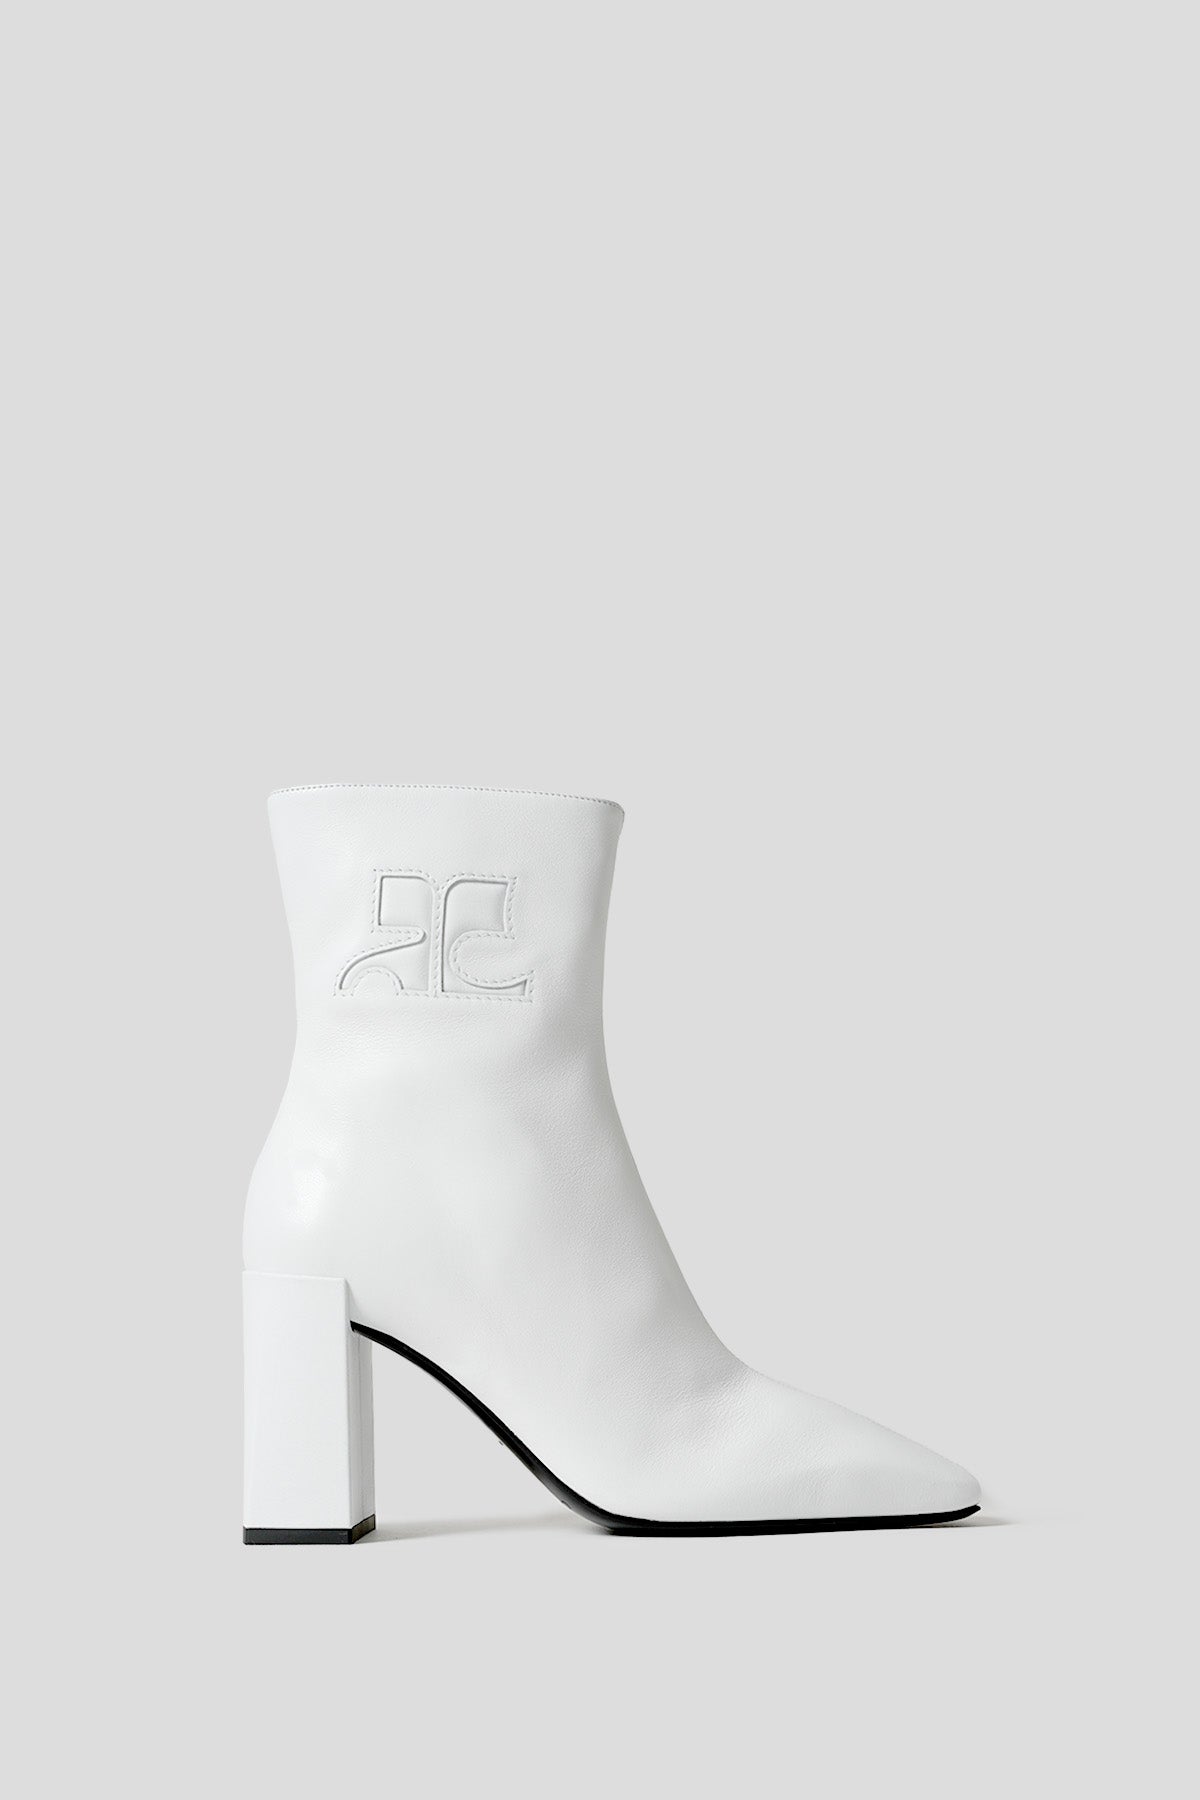 COURRÈGES - HERITAGES WHITE LEATHER HERITAGE BOOTS - LE LABO STORE